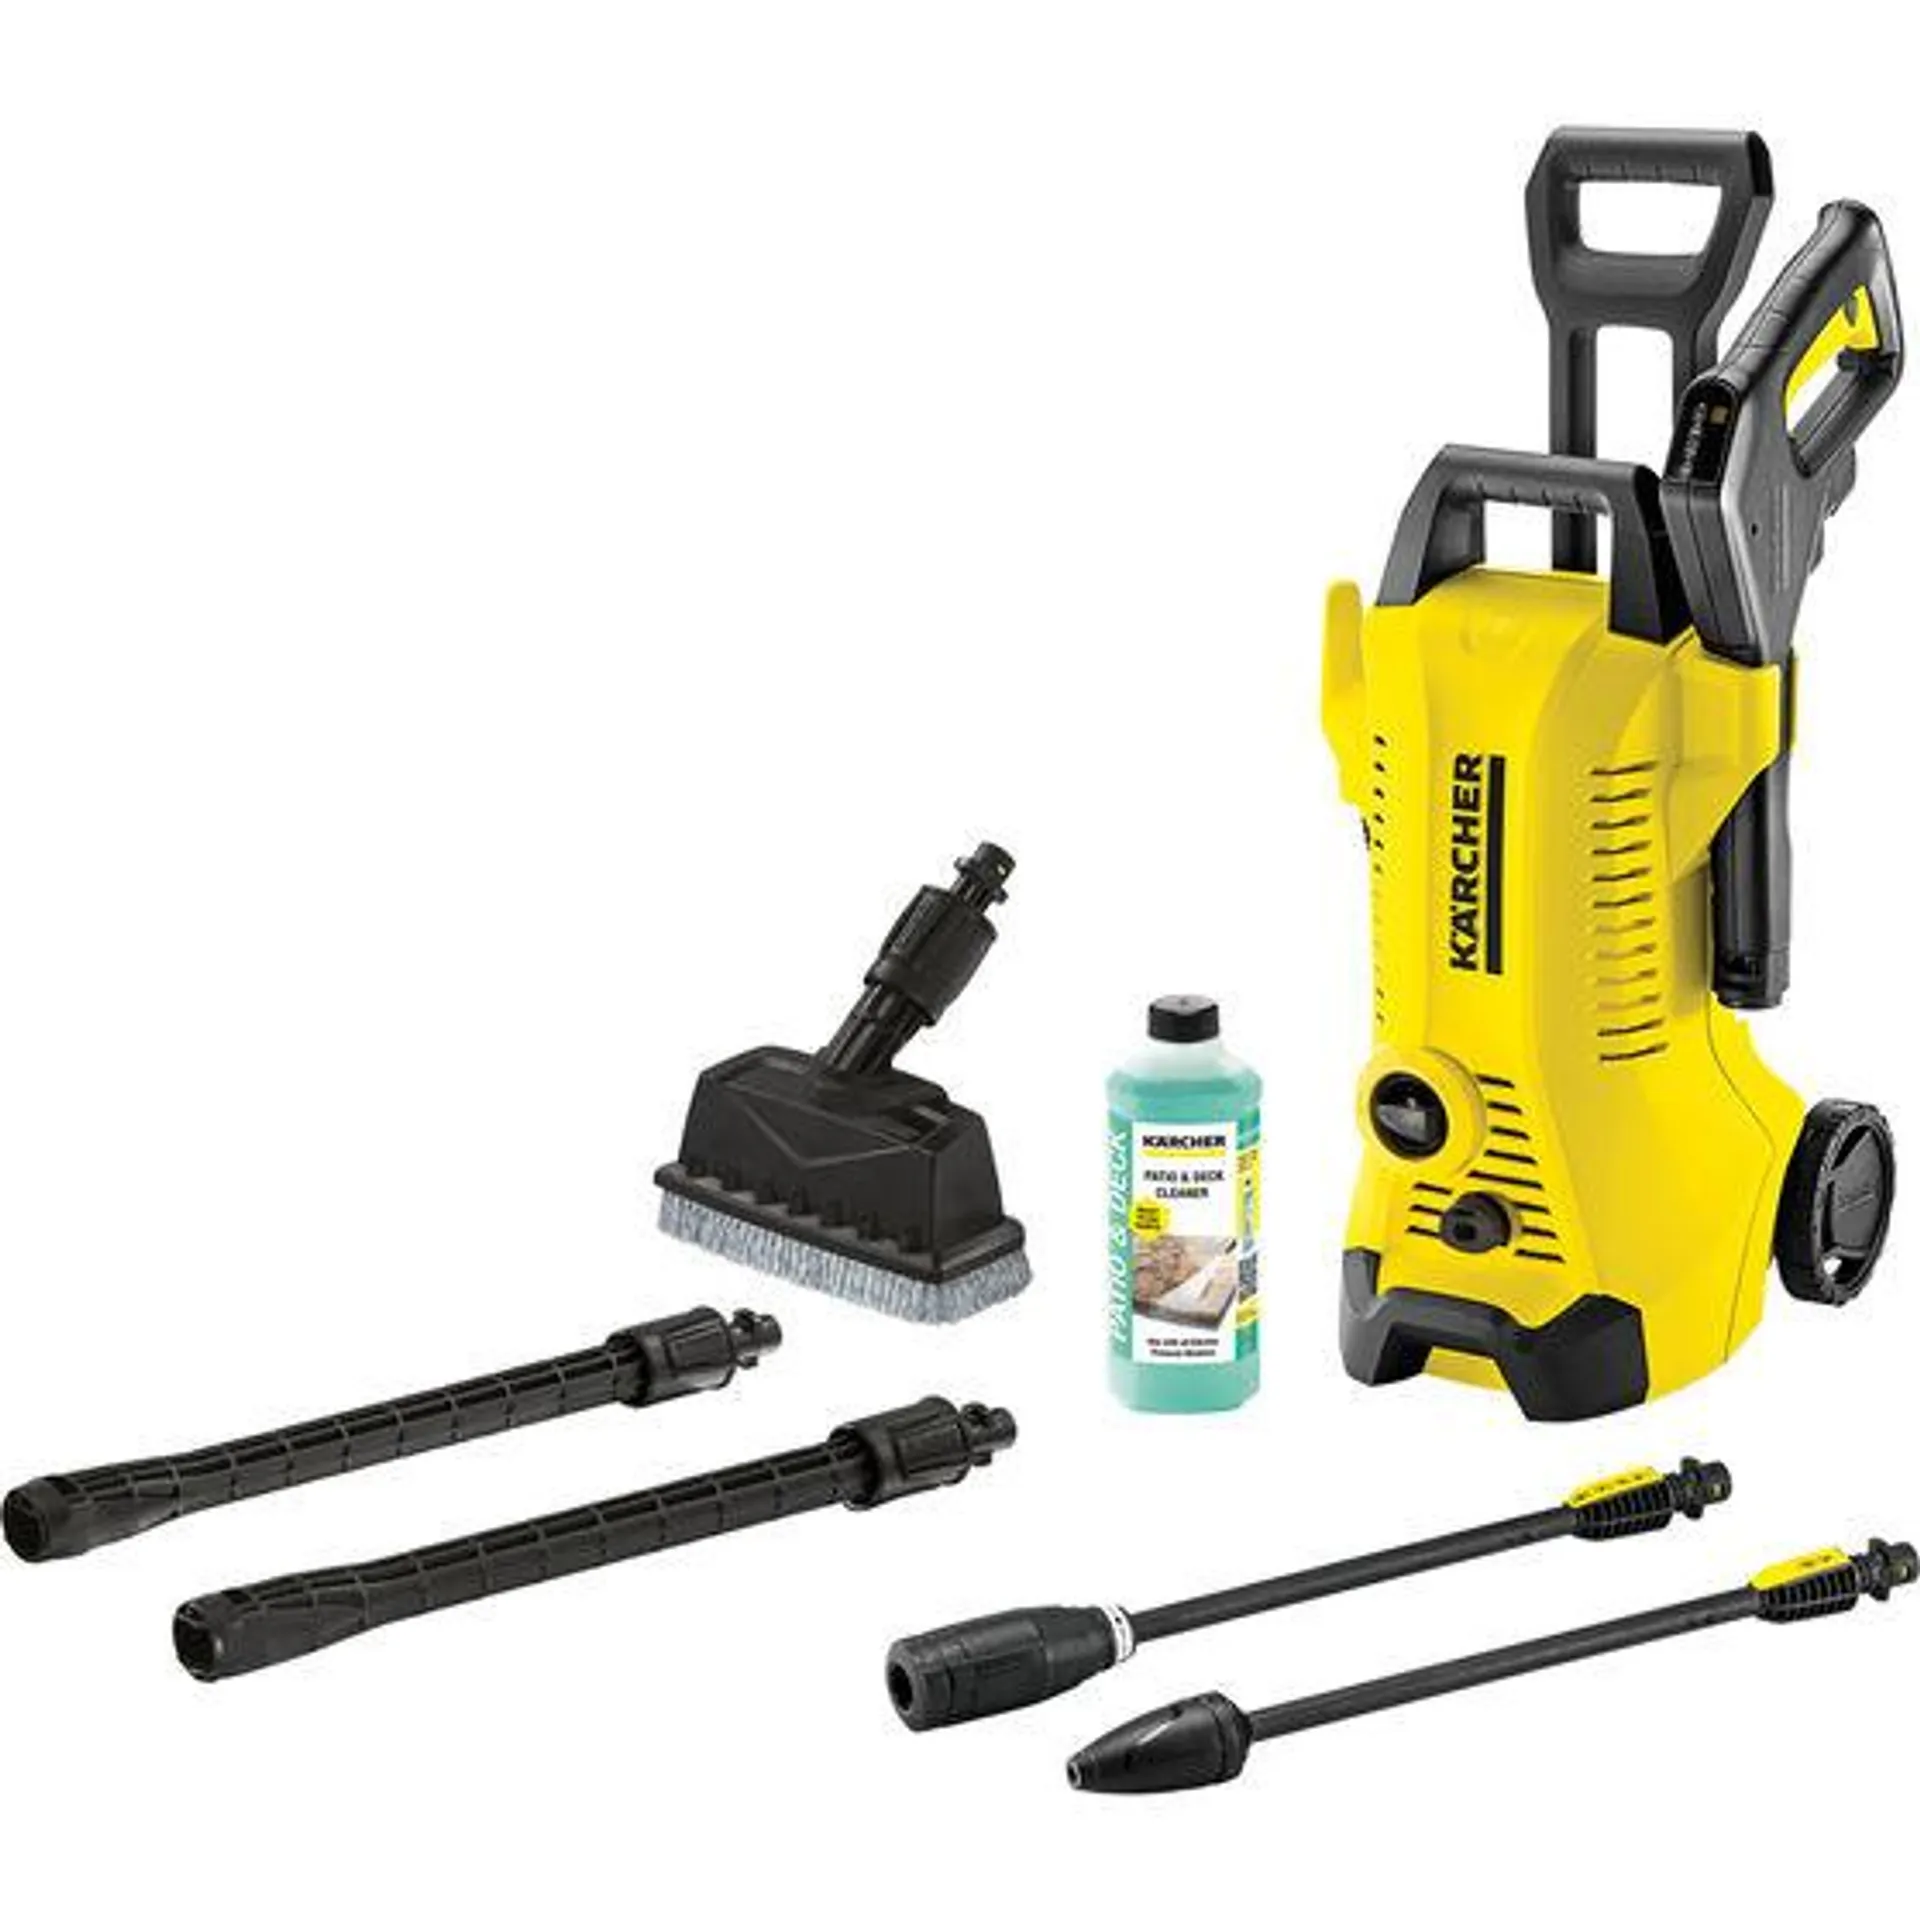 Kärcher K3 Full Control Pressure Washer with Deck Kit - 1950 PSI Max